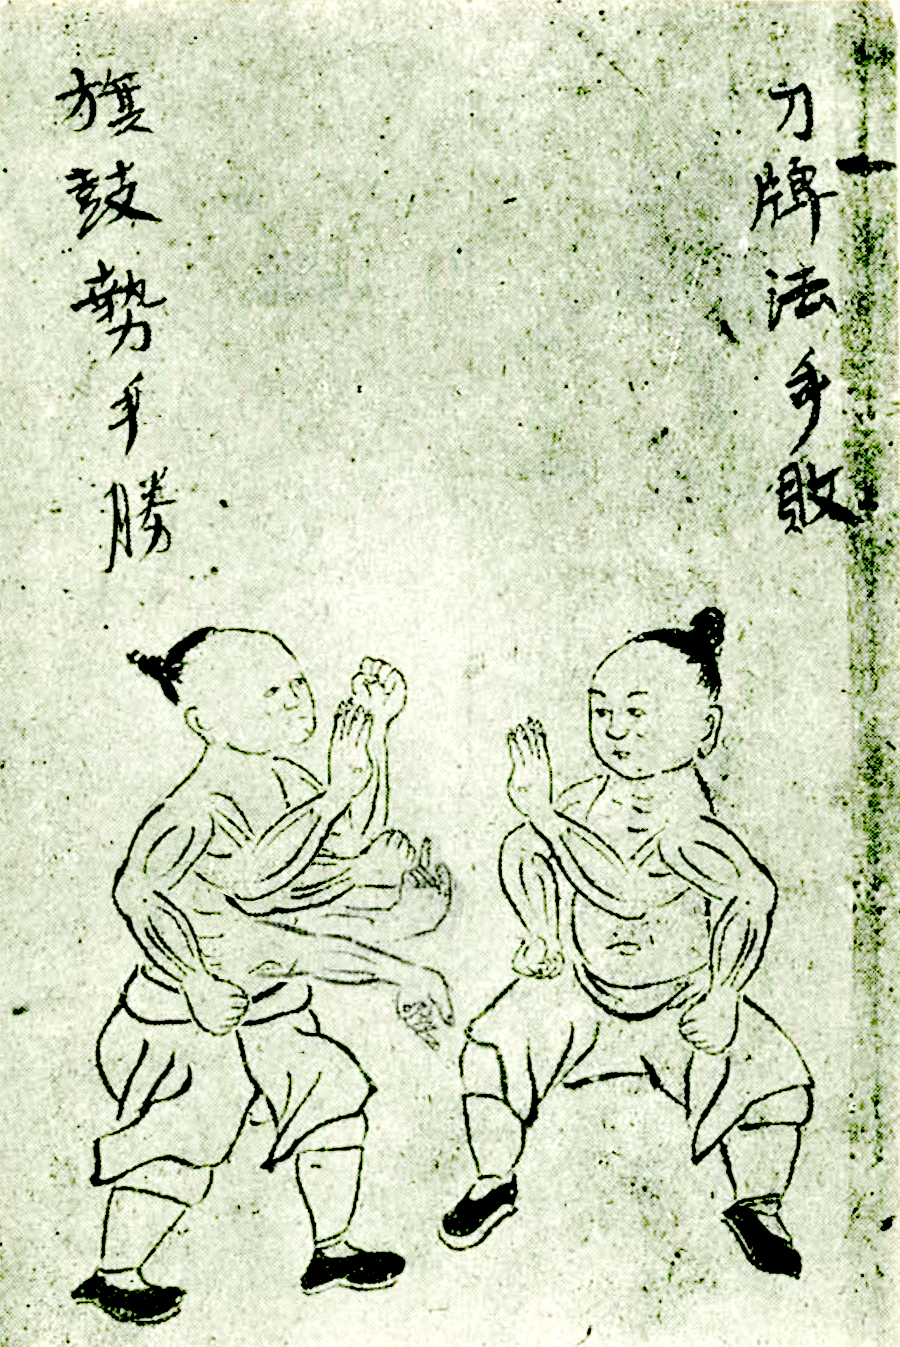 The "18 hands of the vagabonds", from the original Bubishi.